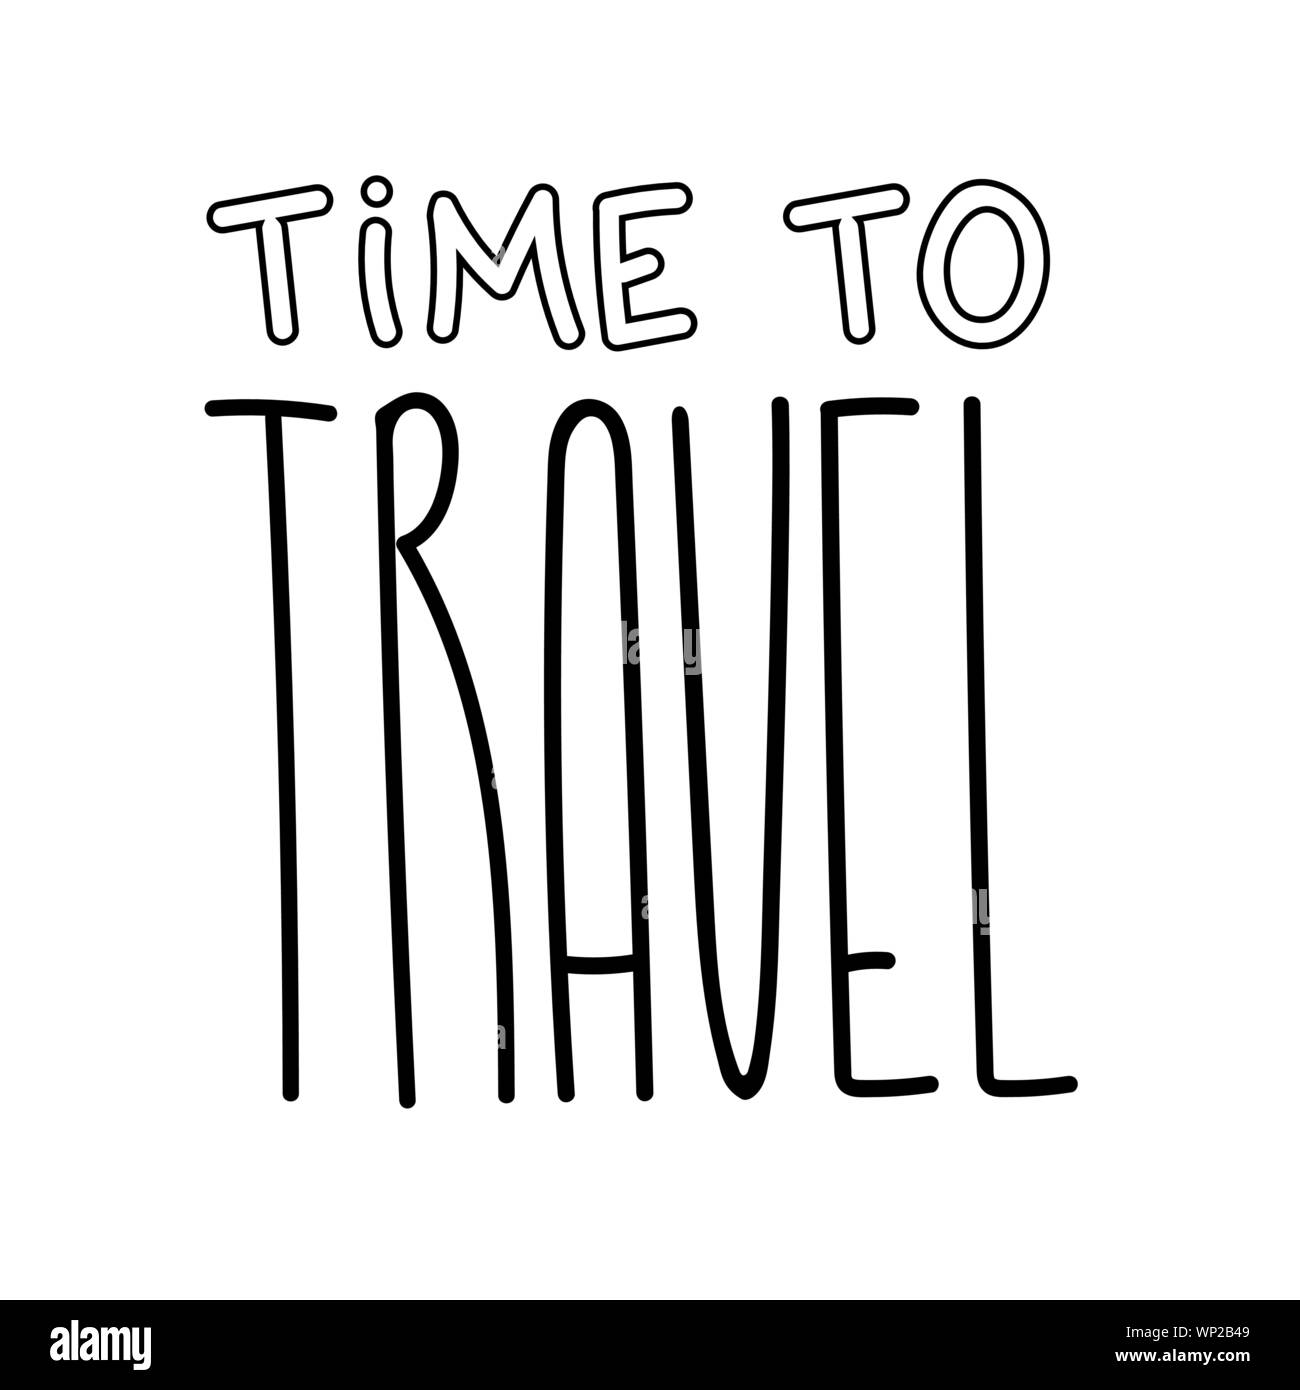 Travel lettering illustration text for inspiration template Stock Vector